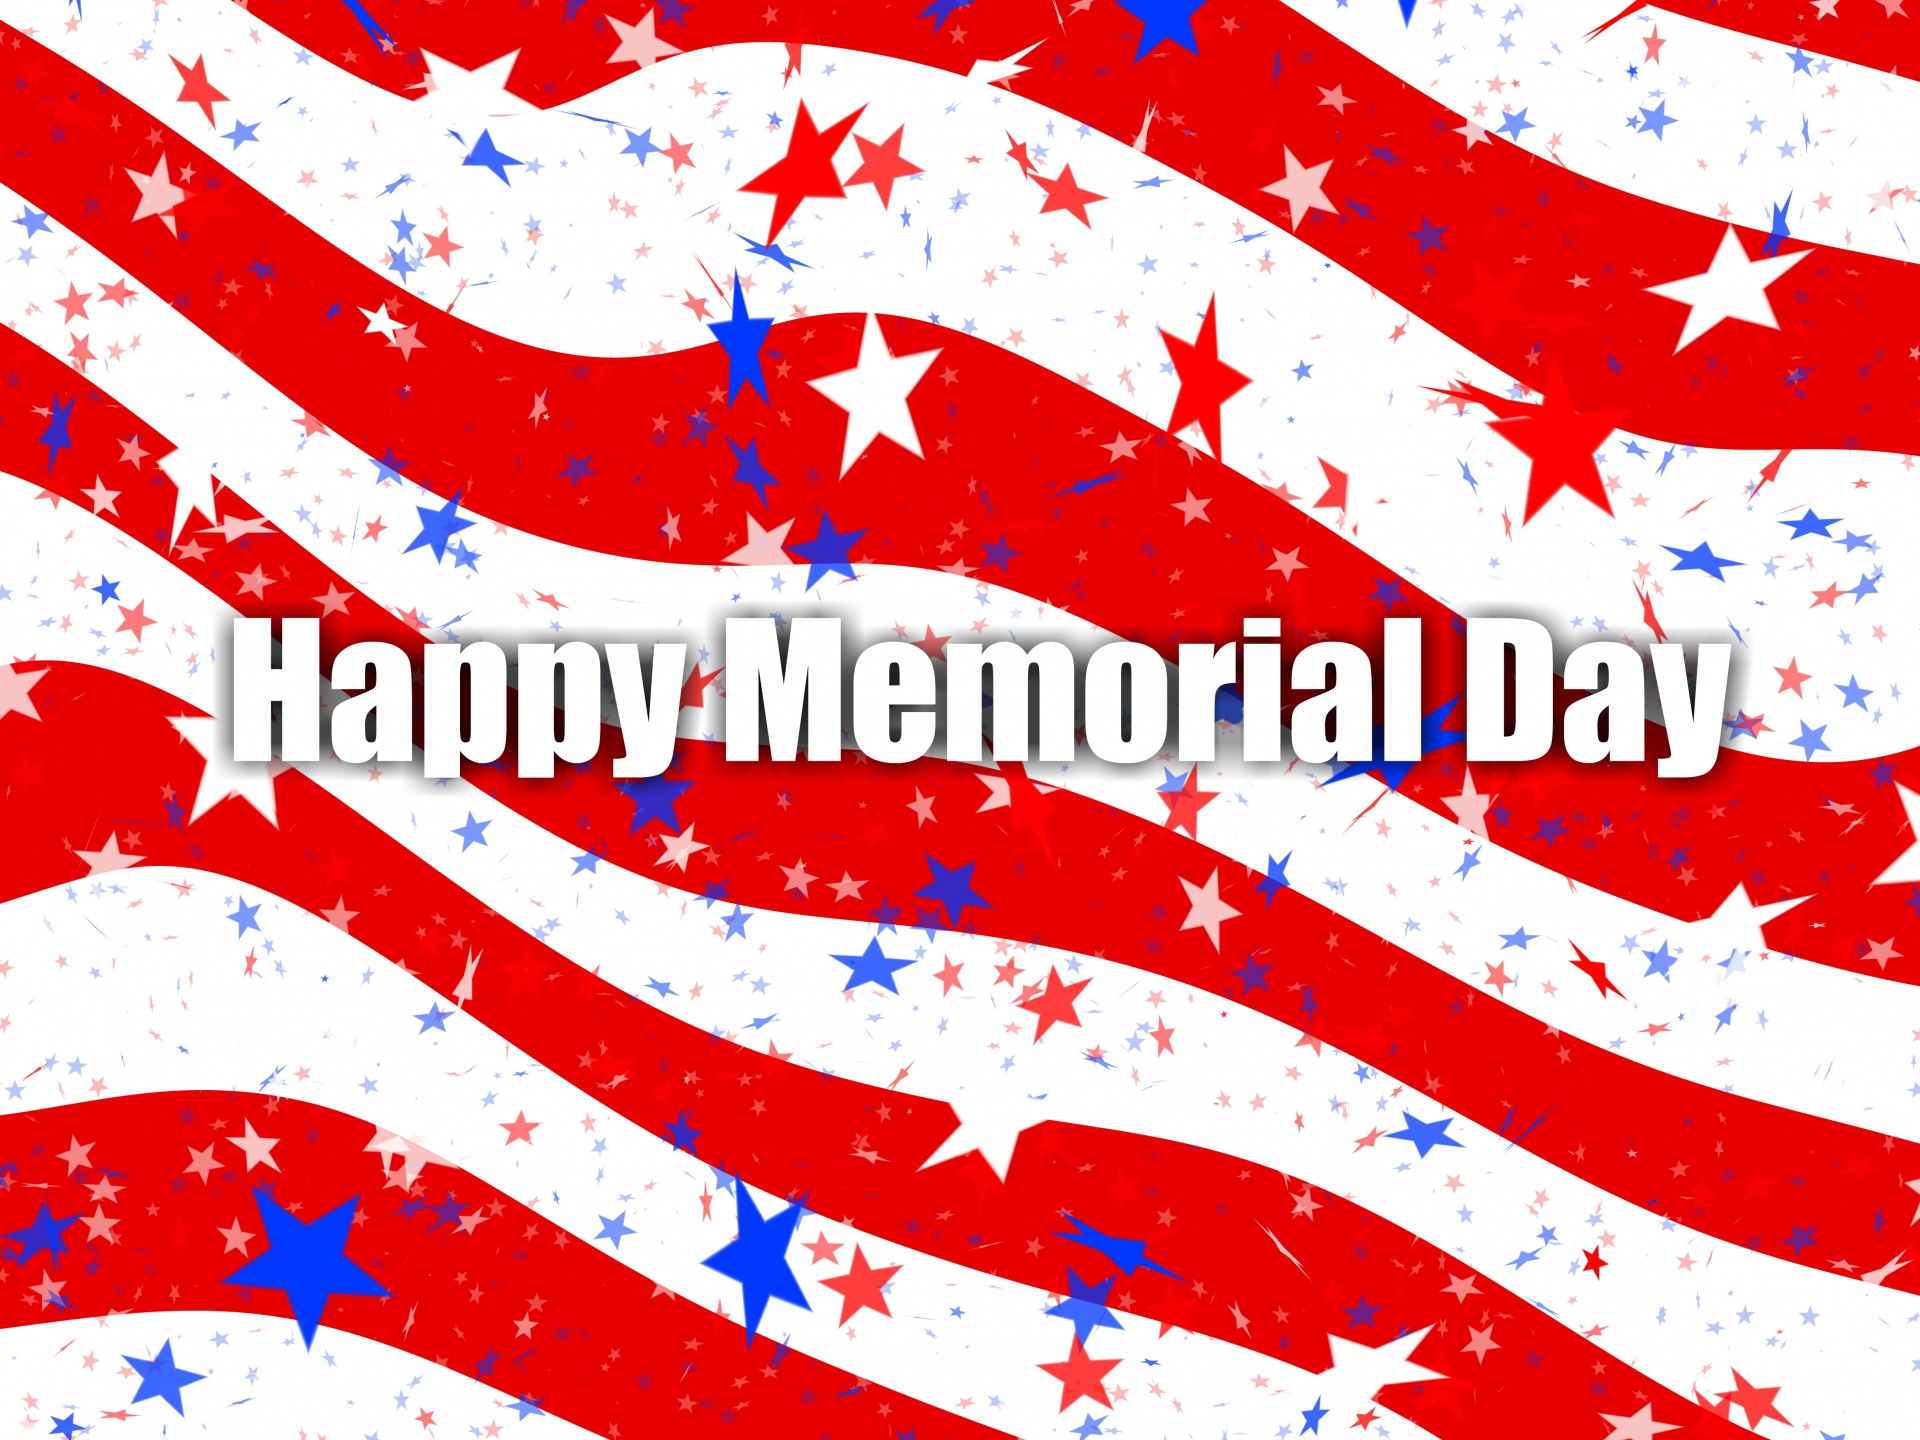 7 Memorial Day Images to Post on Facebook, Twitter & Instagram